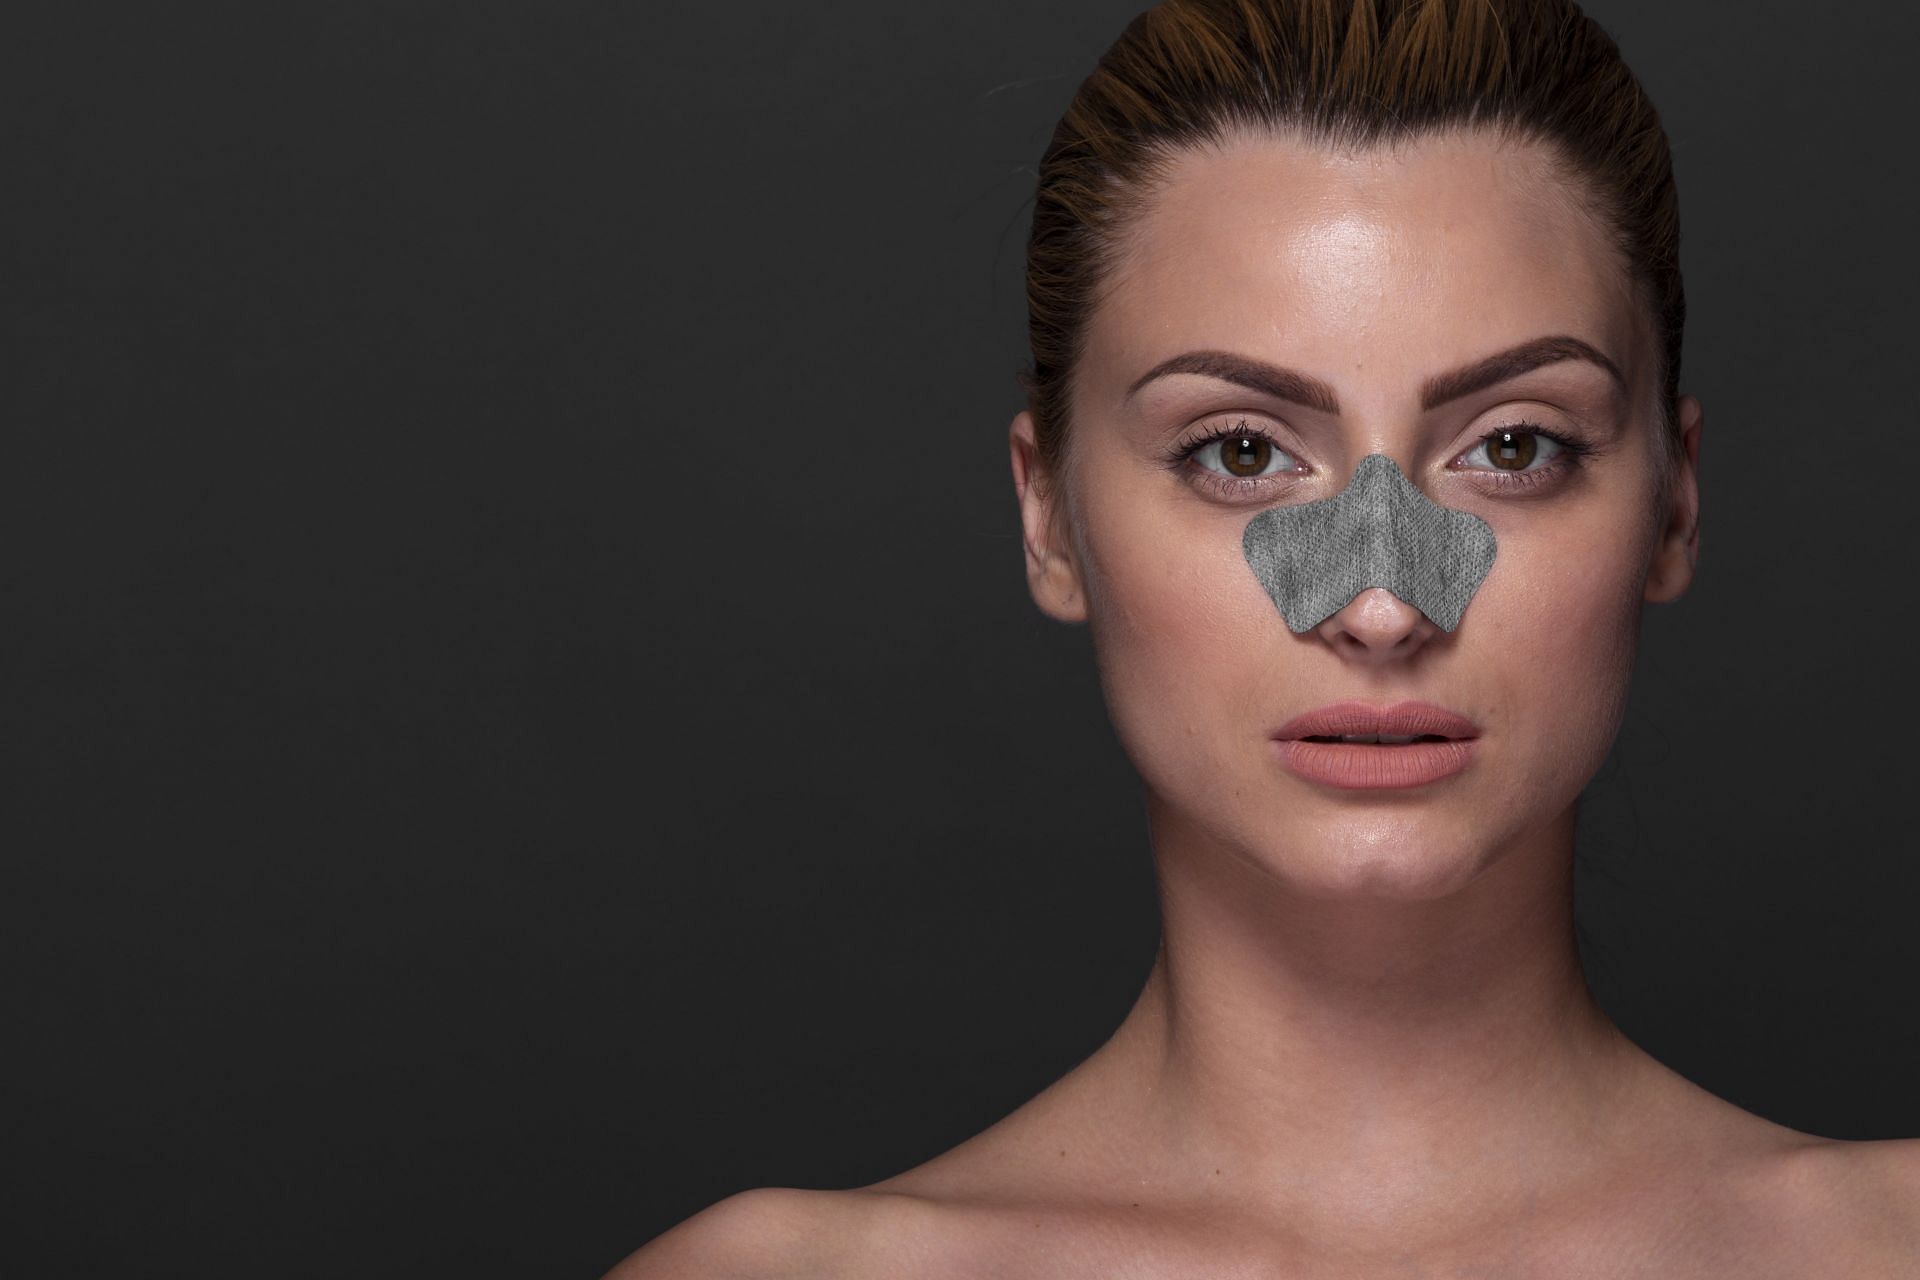 There are adhesive strips that help clear pores. (image via freepik)